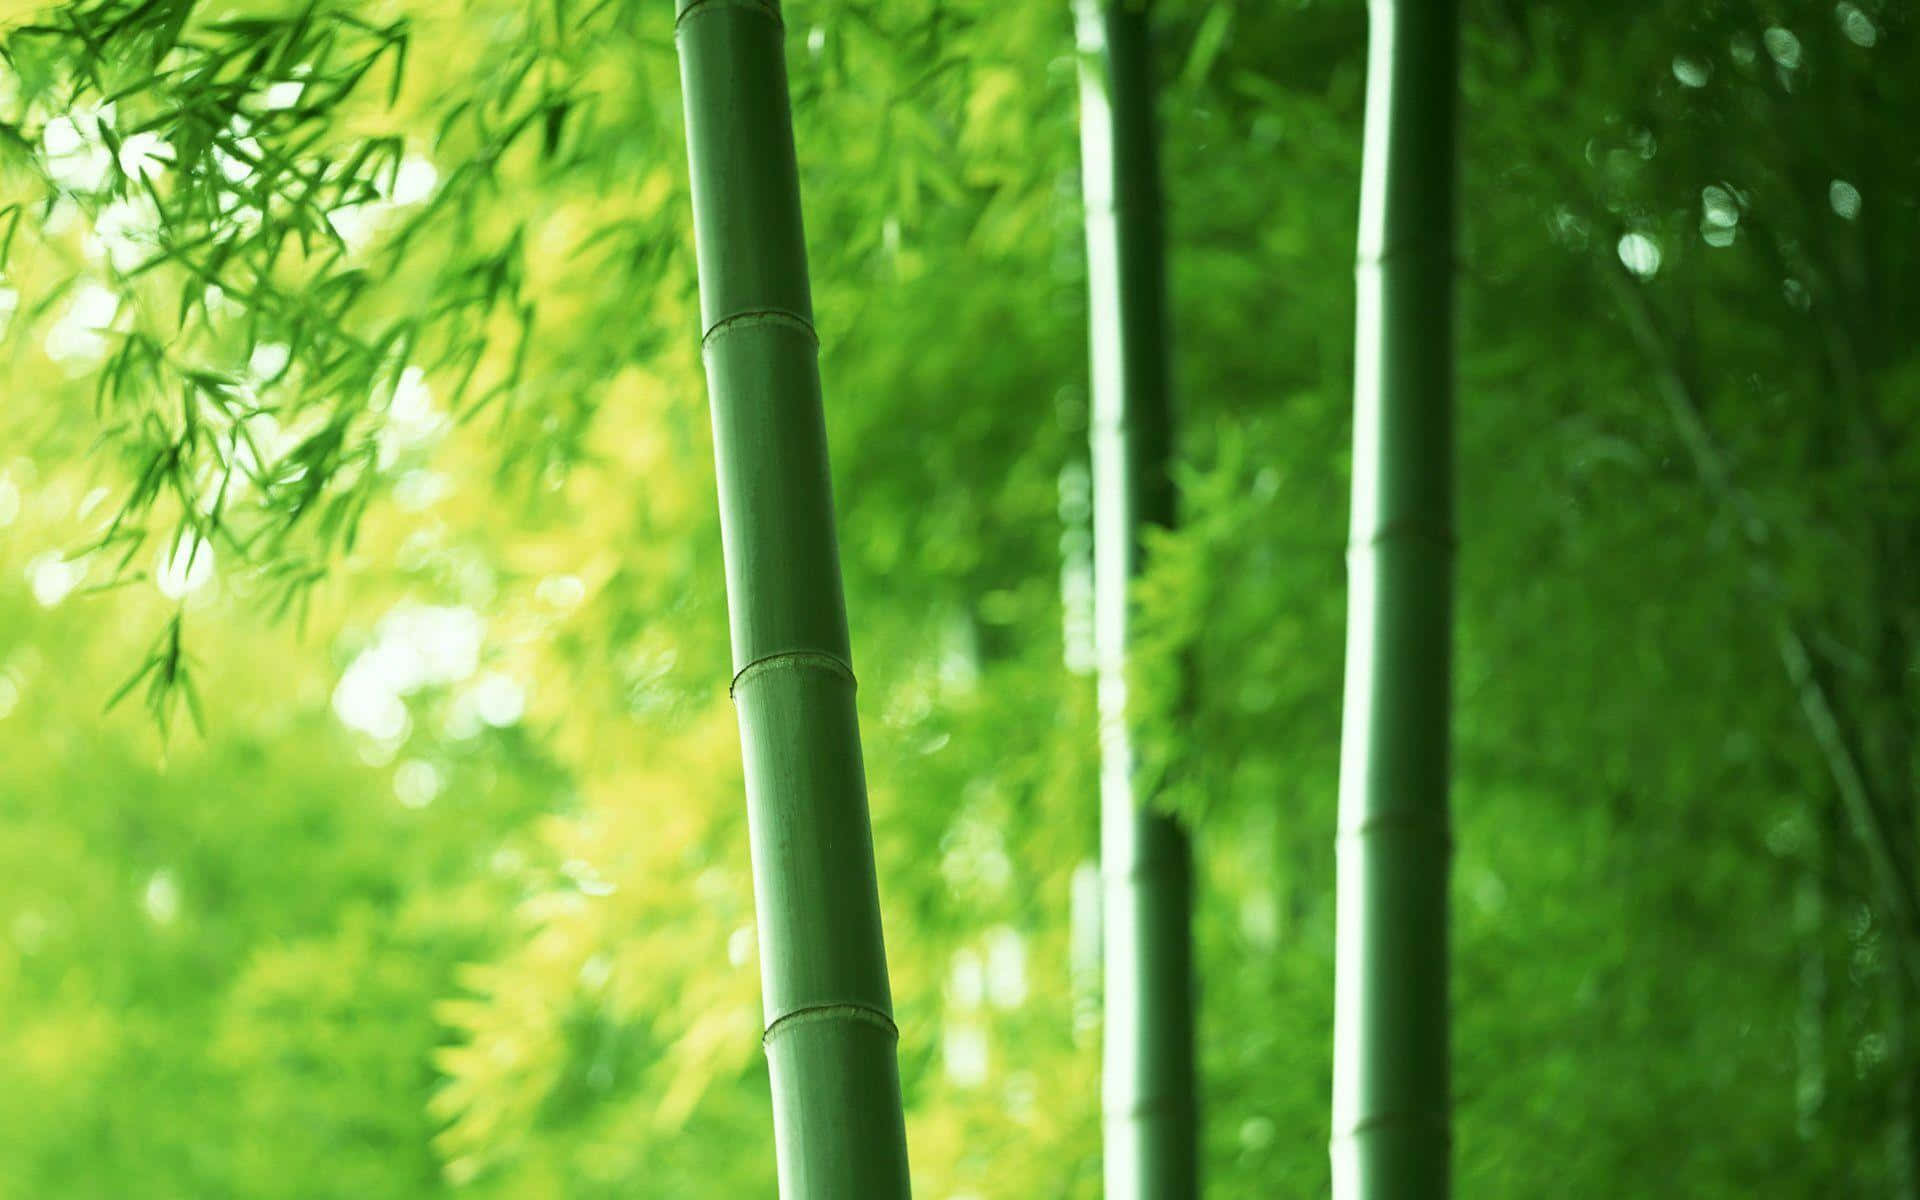 A field of lush green bamboo stalks in the sunlight Wallpaper